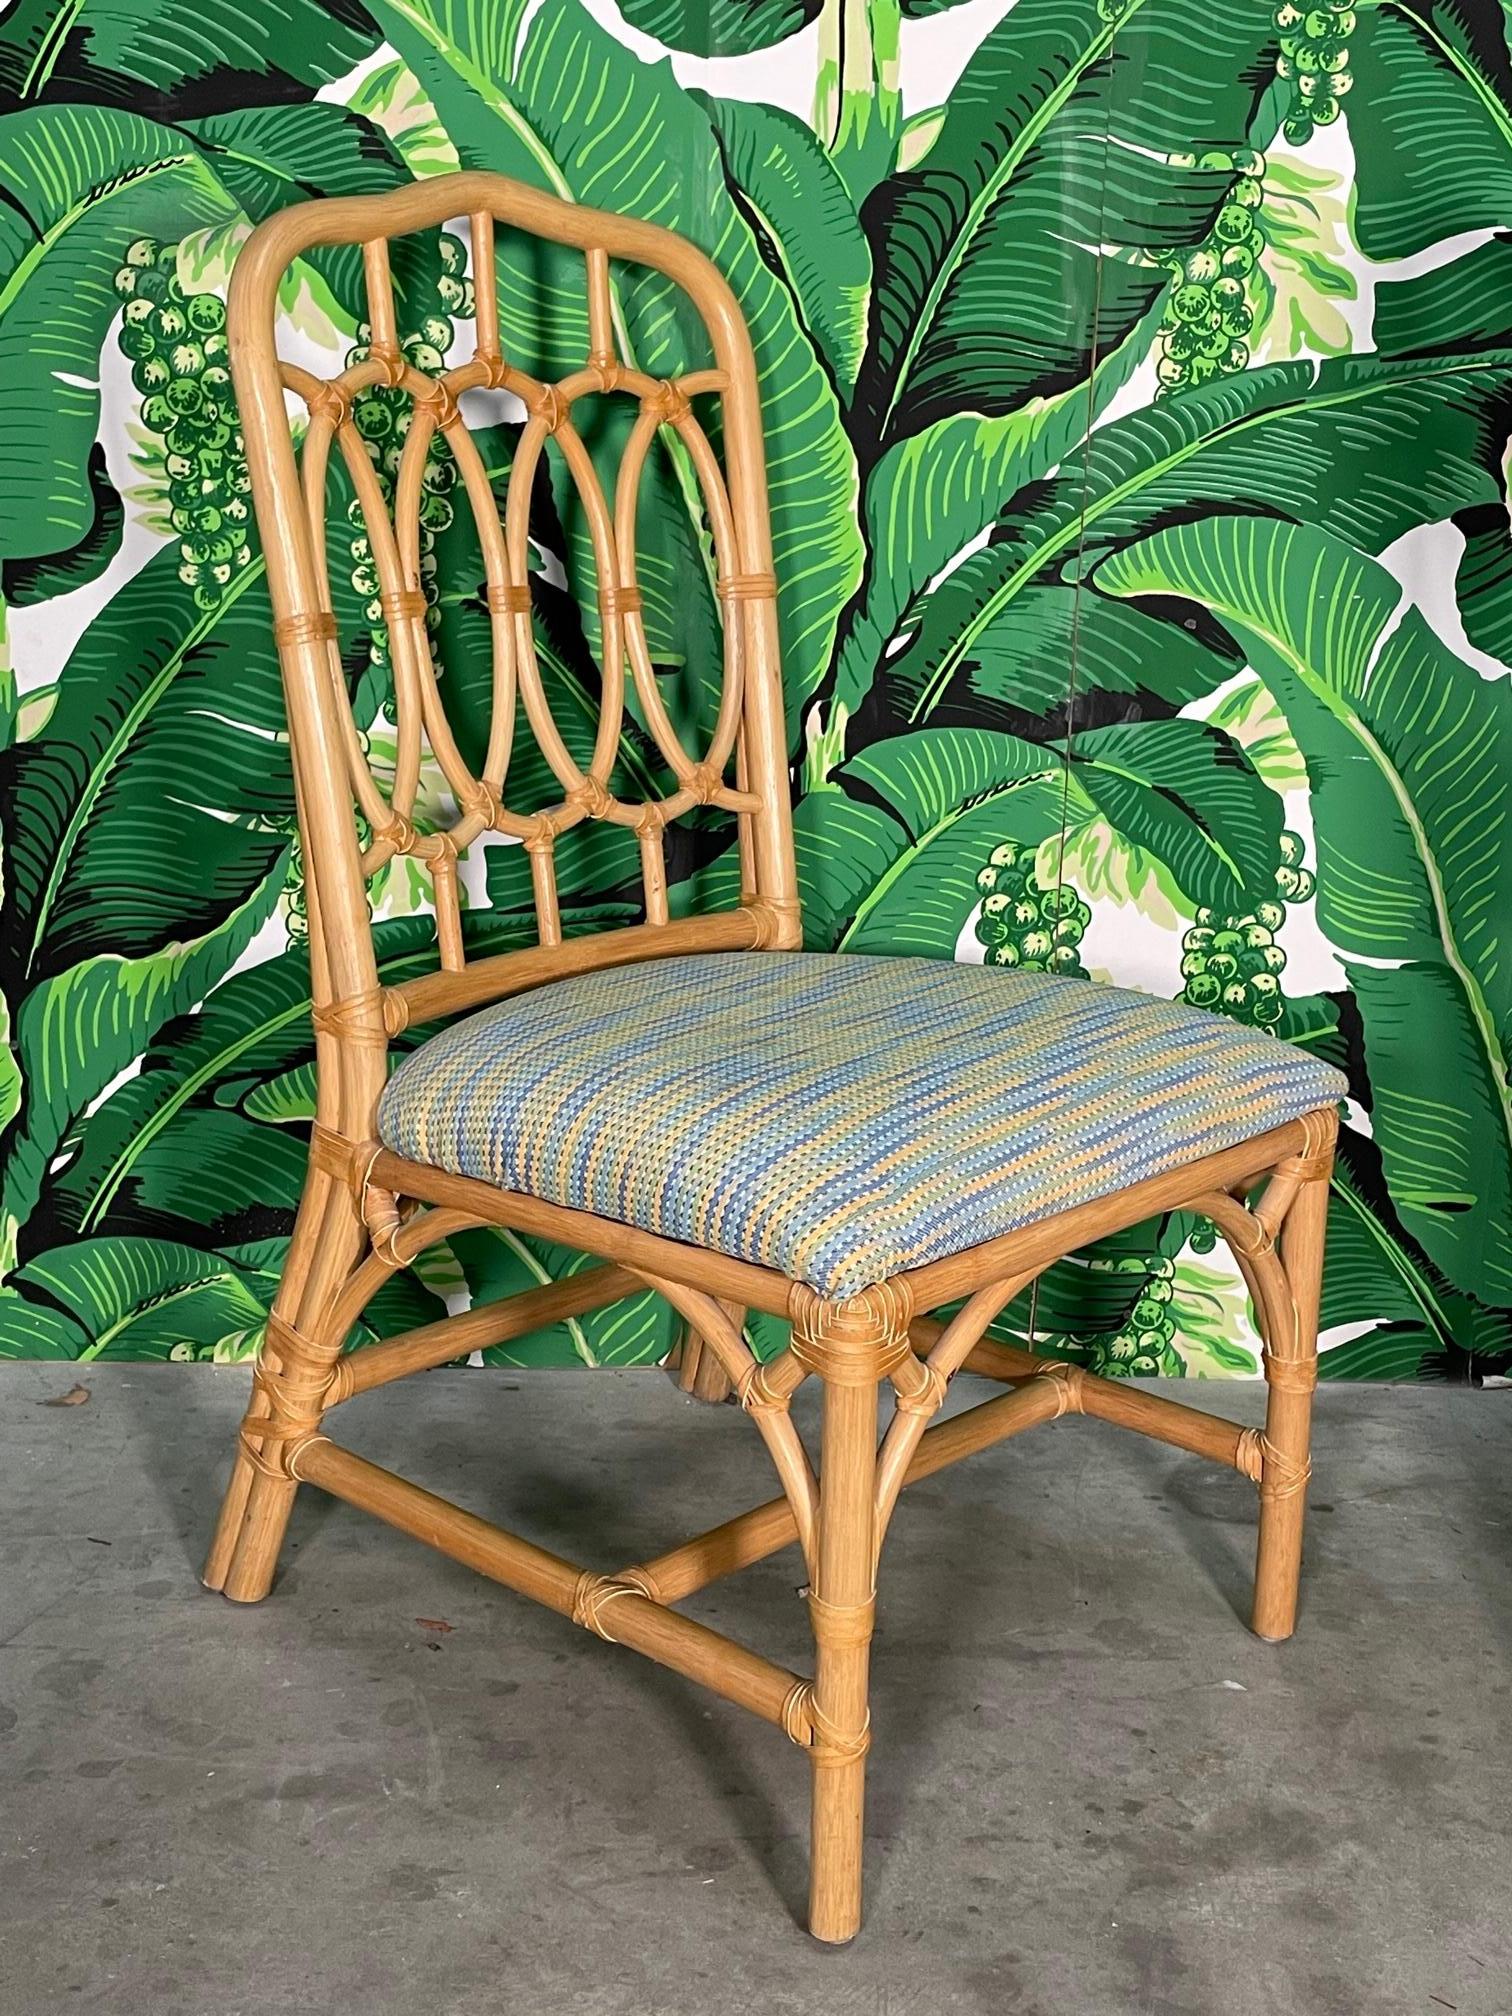 Set of six McGuire style rattan dining chairs feature an organic loop back design and leather wrapped joints. Decorative spandrels and splayed rear legs complete the well-constructed frame. Good condition with only minor imperfections consistent